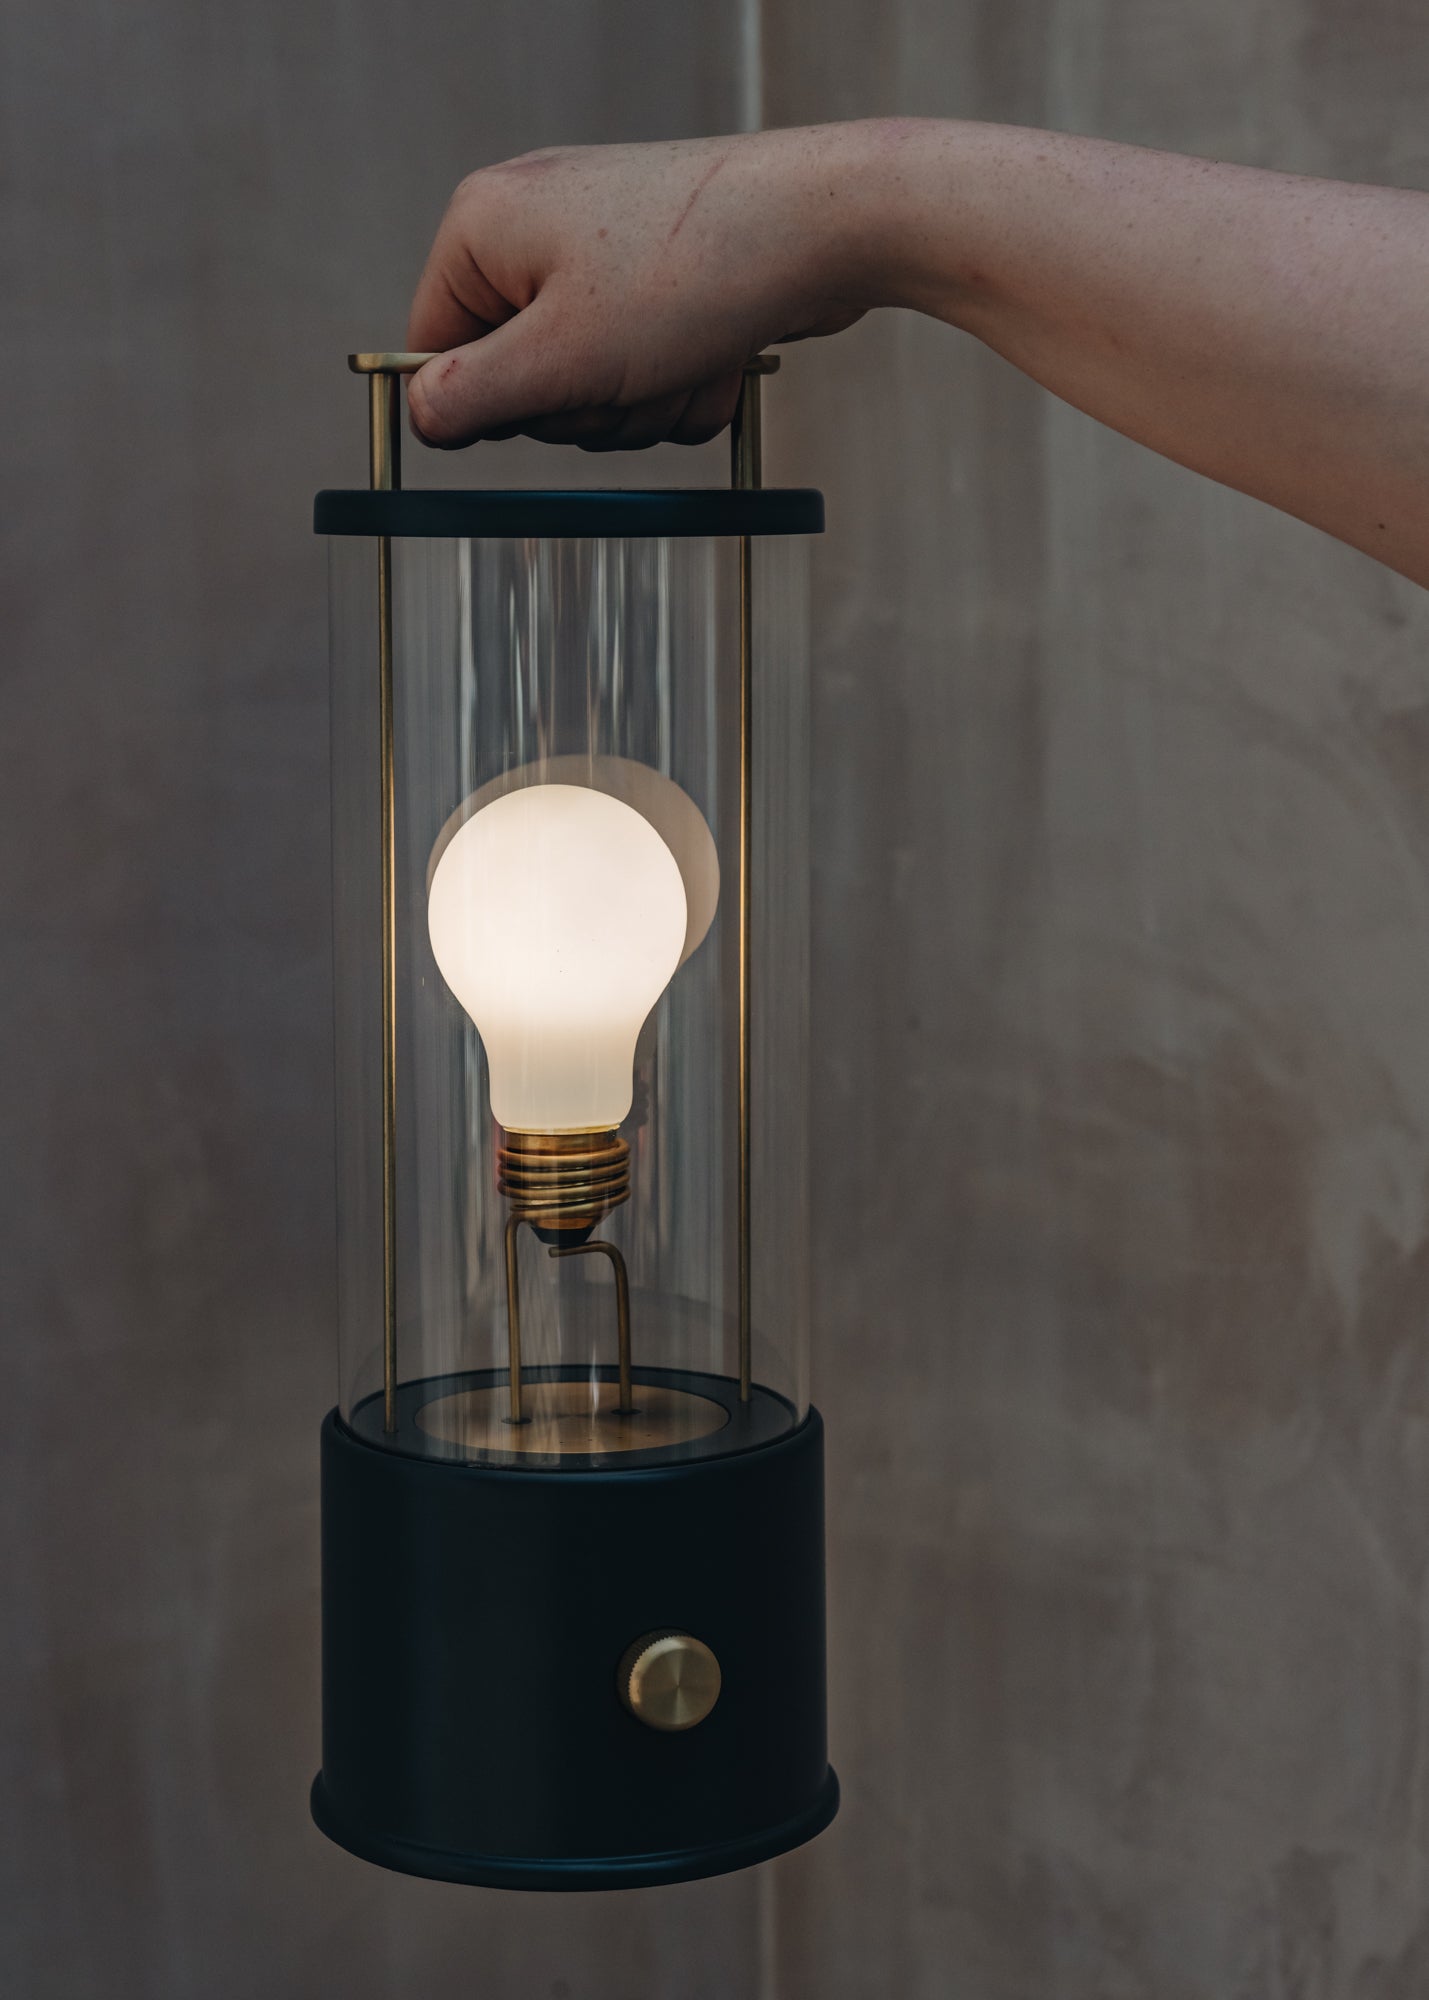 The Muse Portable Indoor/Outdoor Lamp in Hackles Black